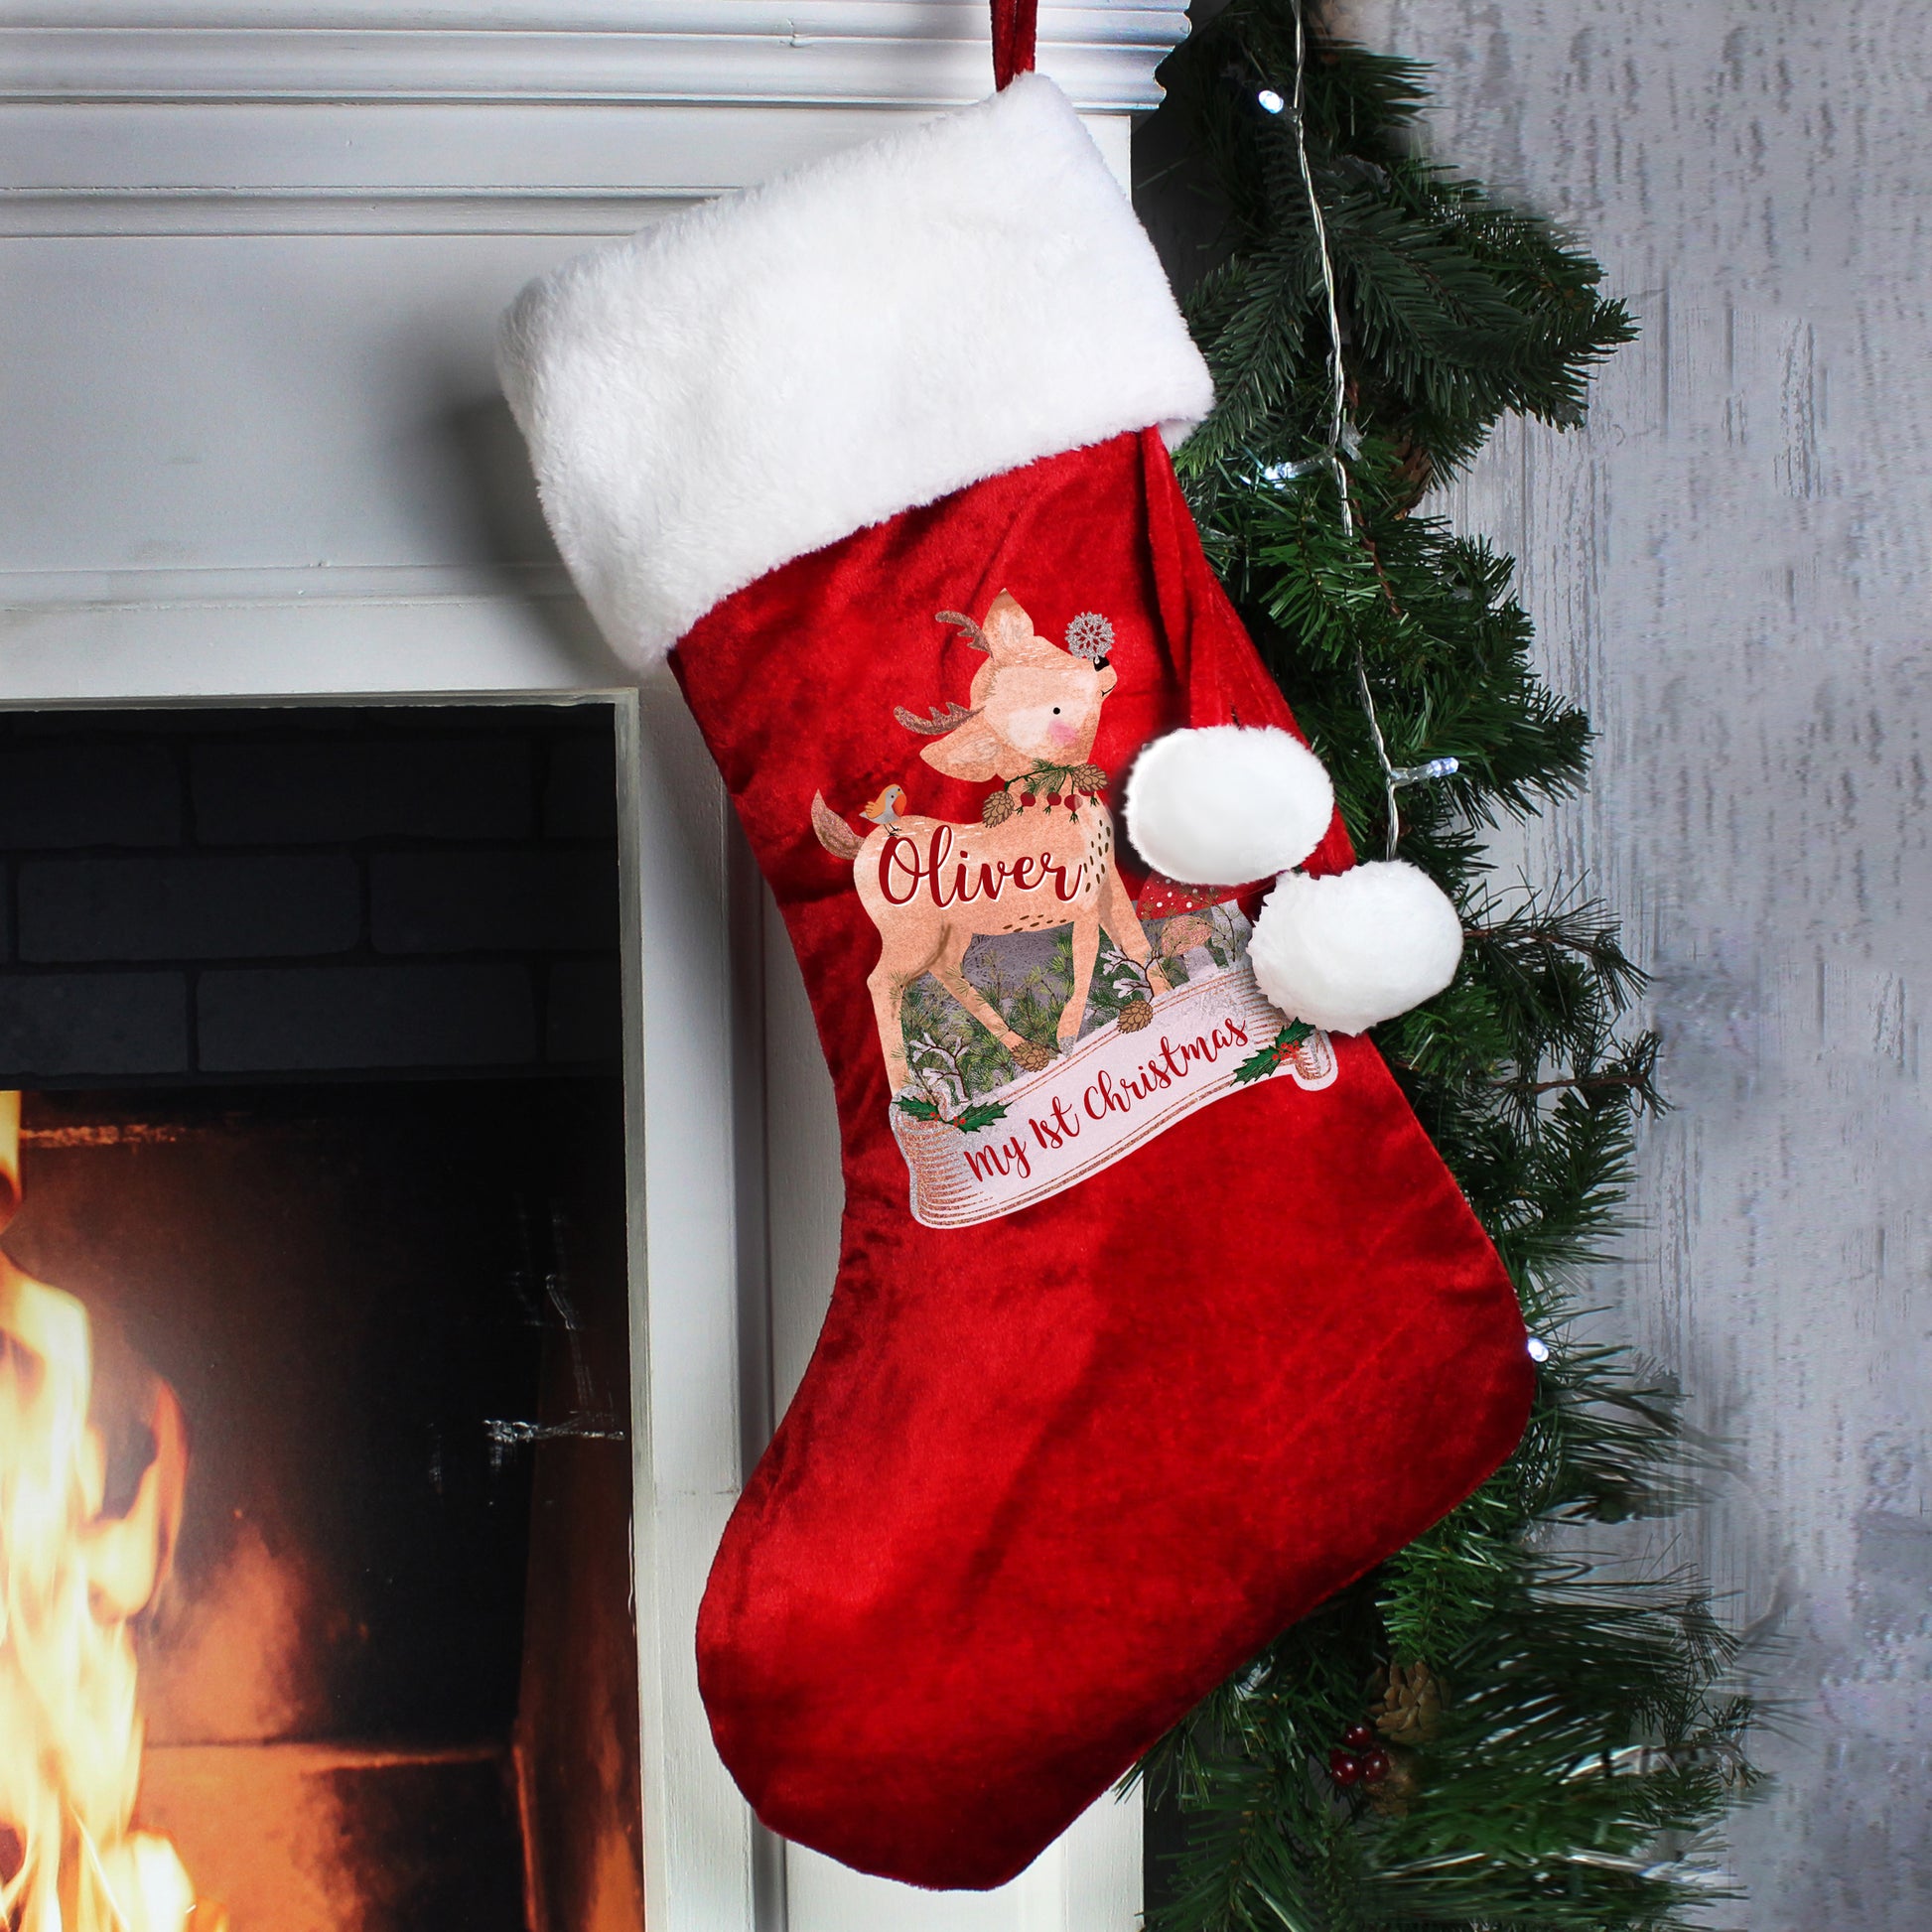 Festive fawn luxury red stocking - Lilybet loves